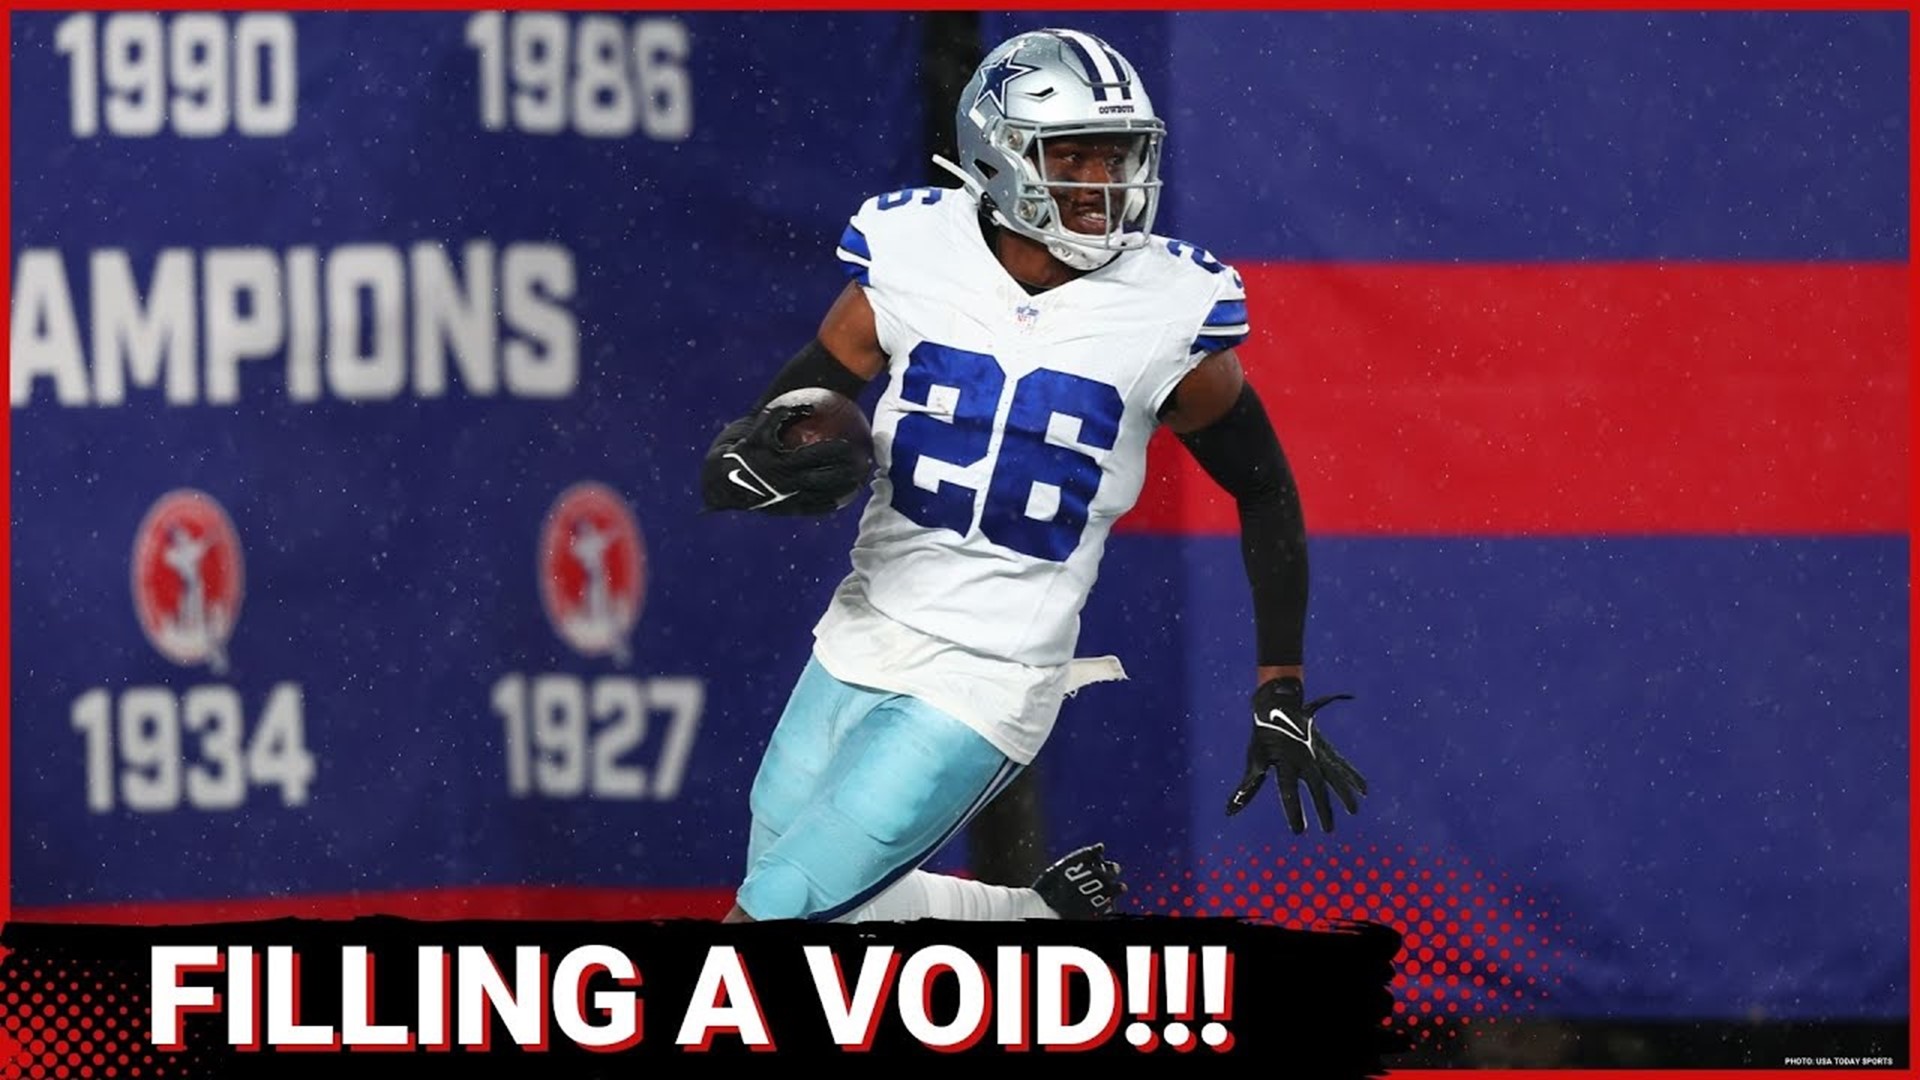 Week 3 of the NFL season started with the Dallas Cowboys losing one of their best defenders, CB Trevon Diggs to an ACL tear. How will the Cowboys shift .